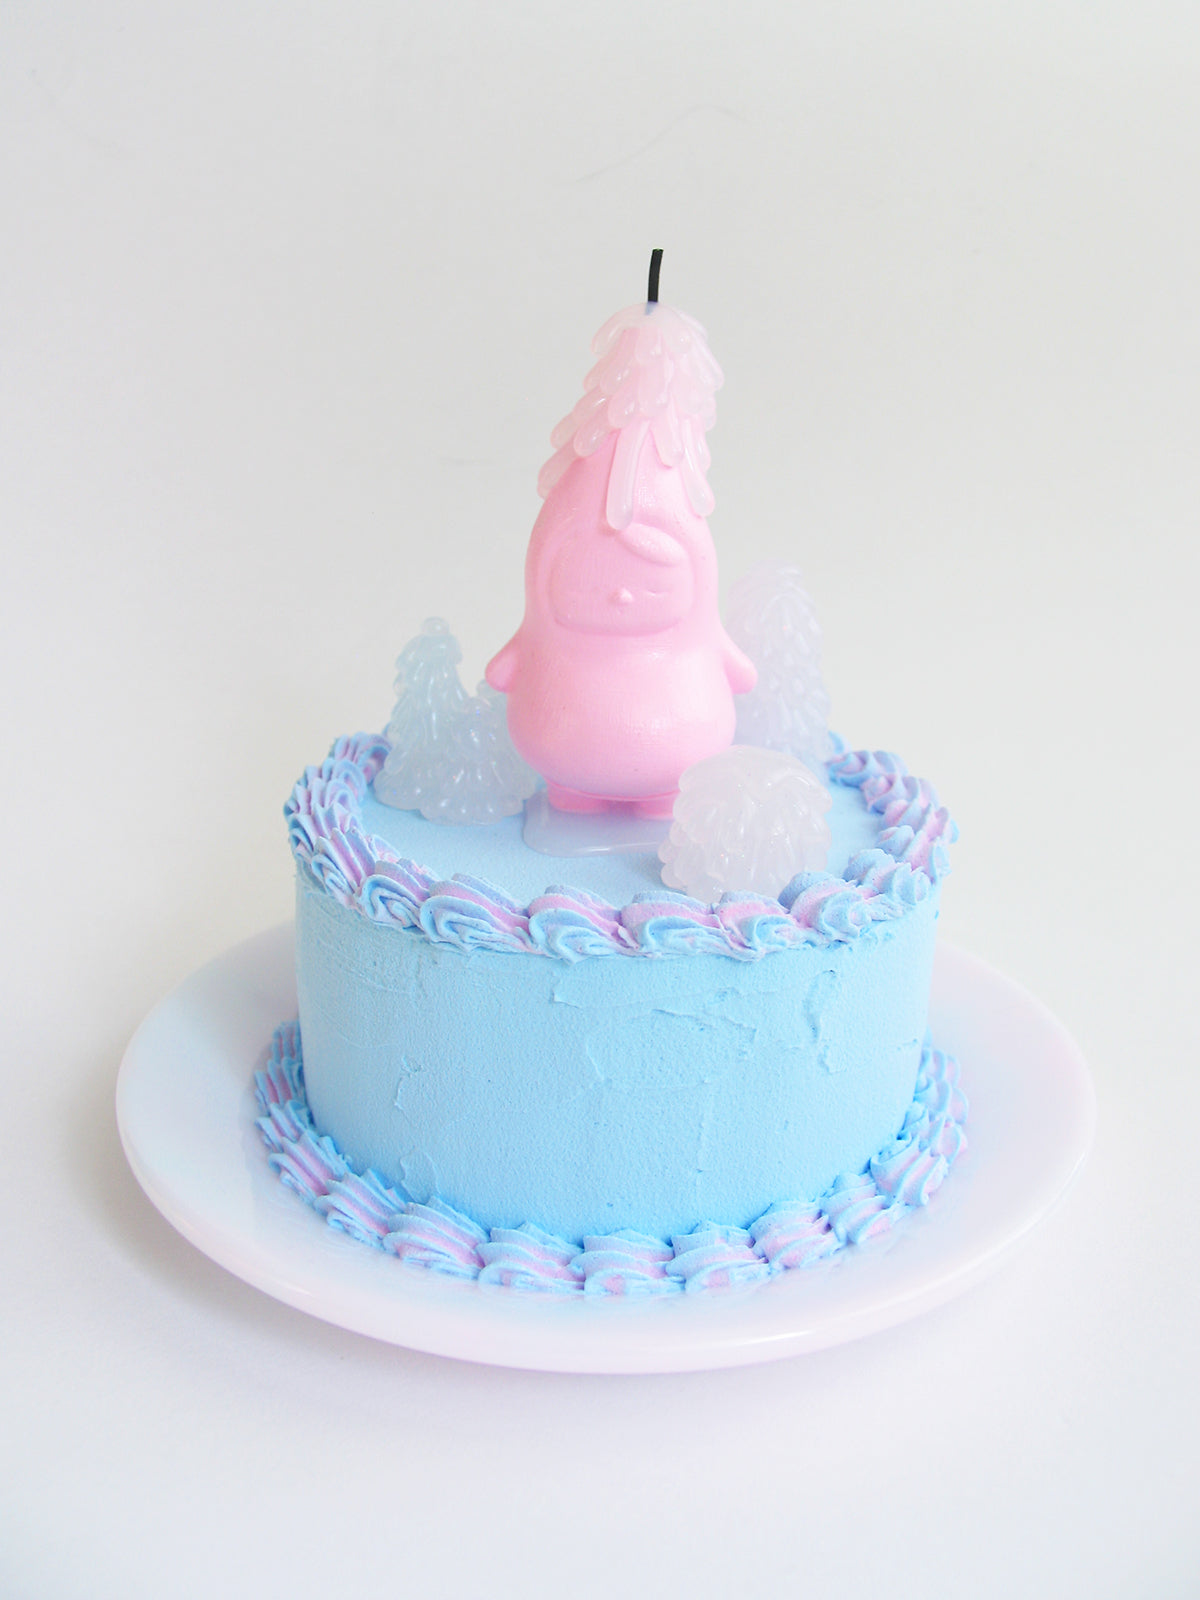 Melty World - Glue Baby Pucky Cake 1 (Pink on Blue) by Brigitte Coovert